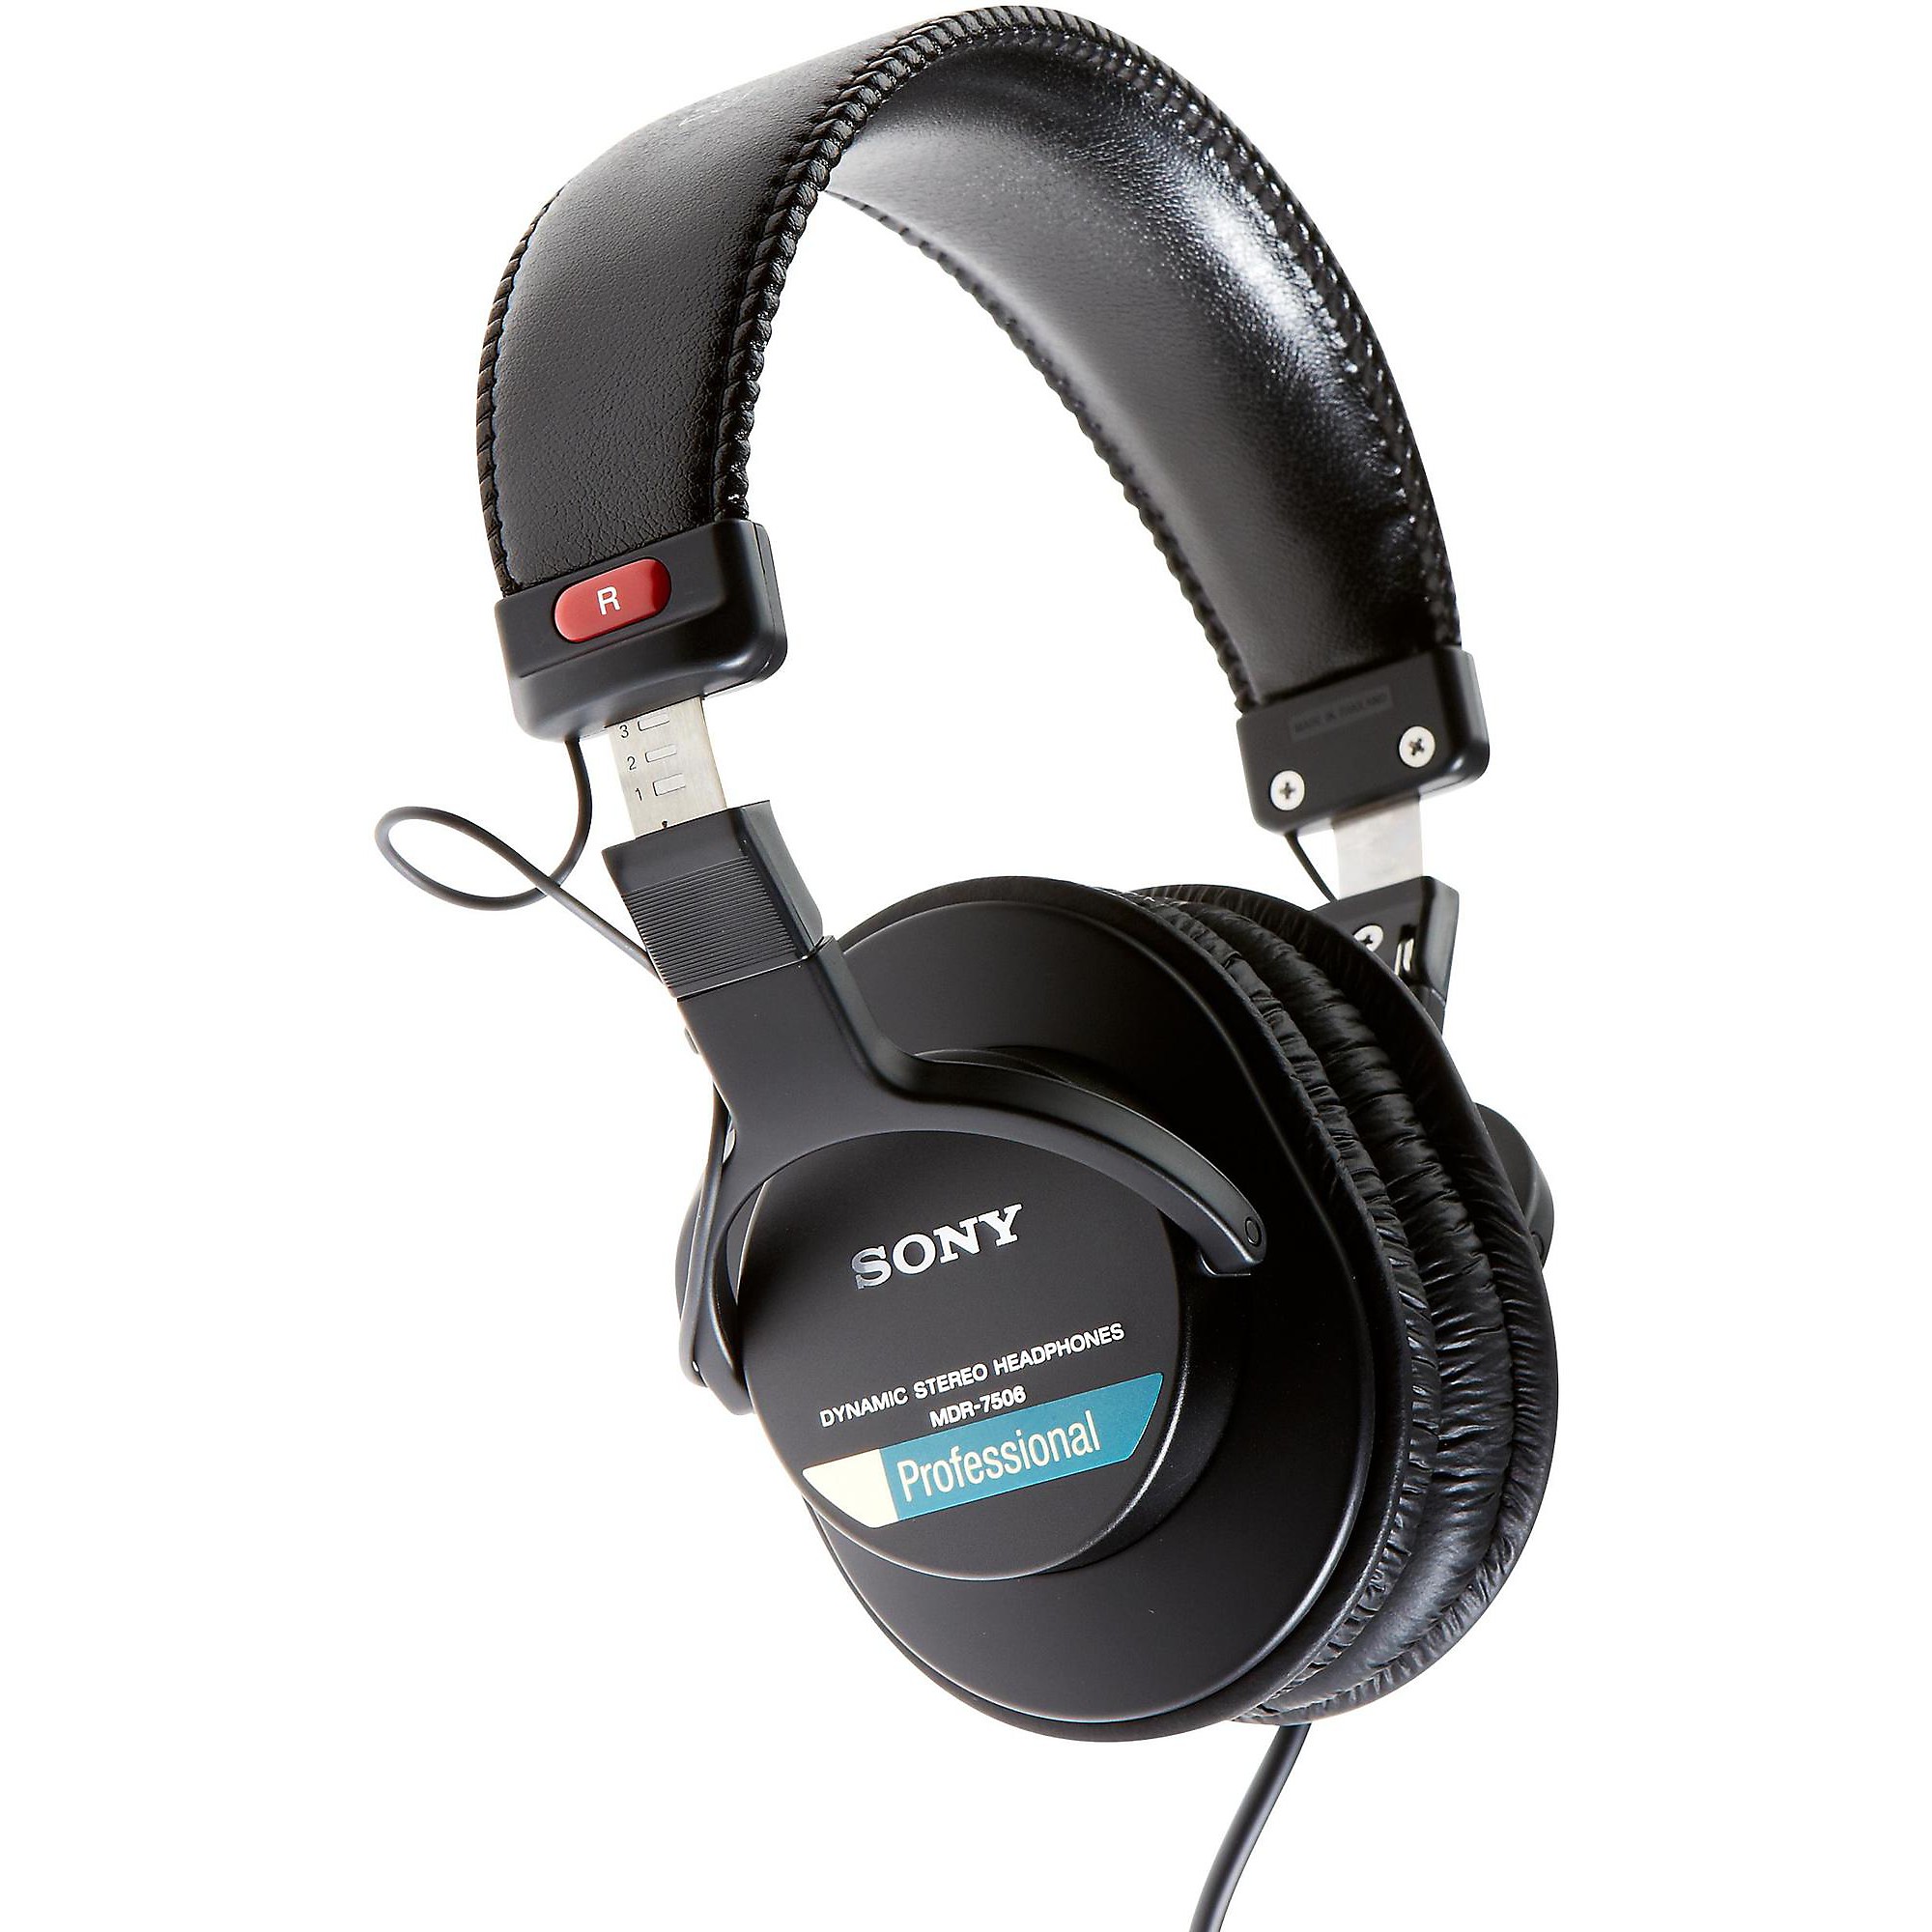 Sony MDR-7506 Professional Closed-Back Headphones | Music & Arts